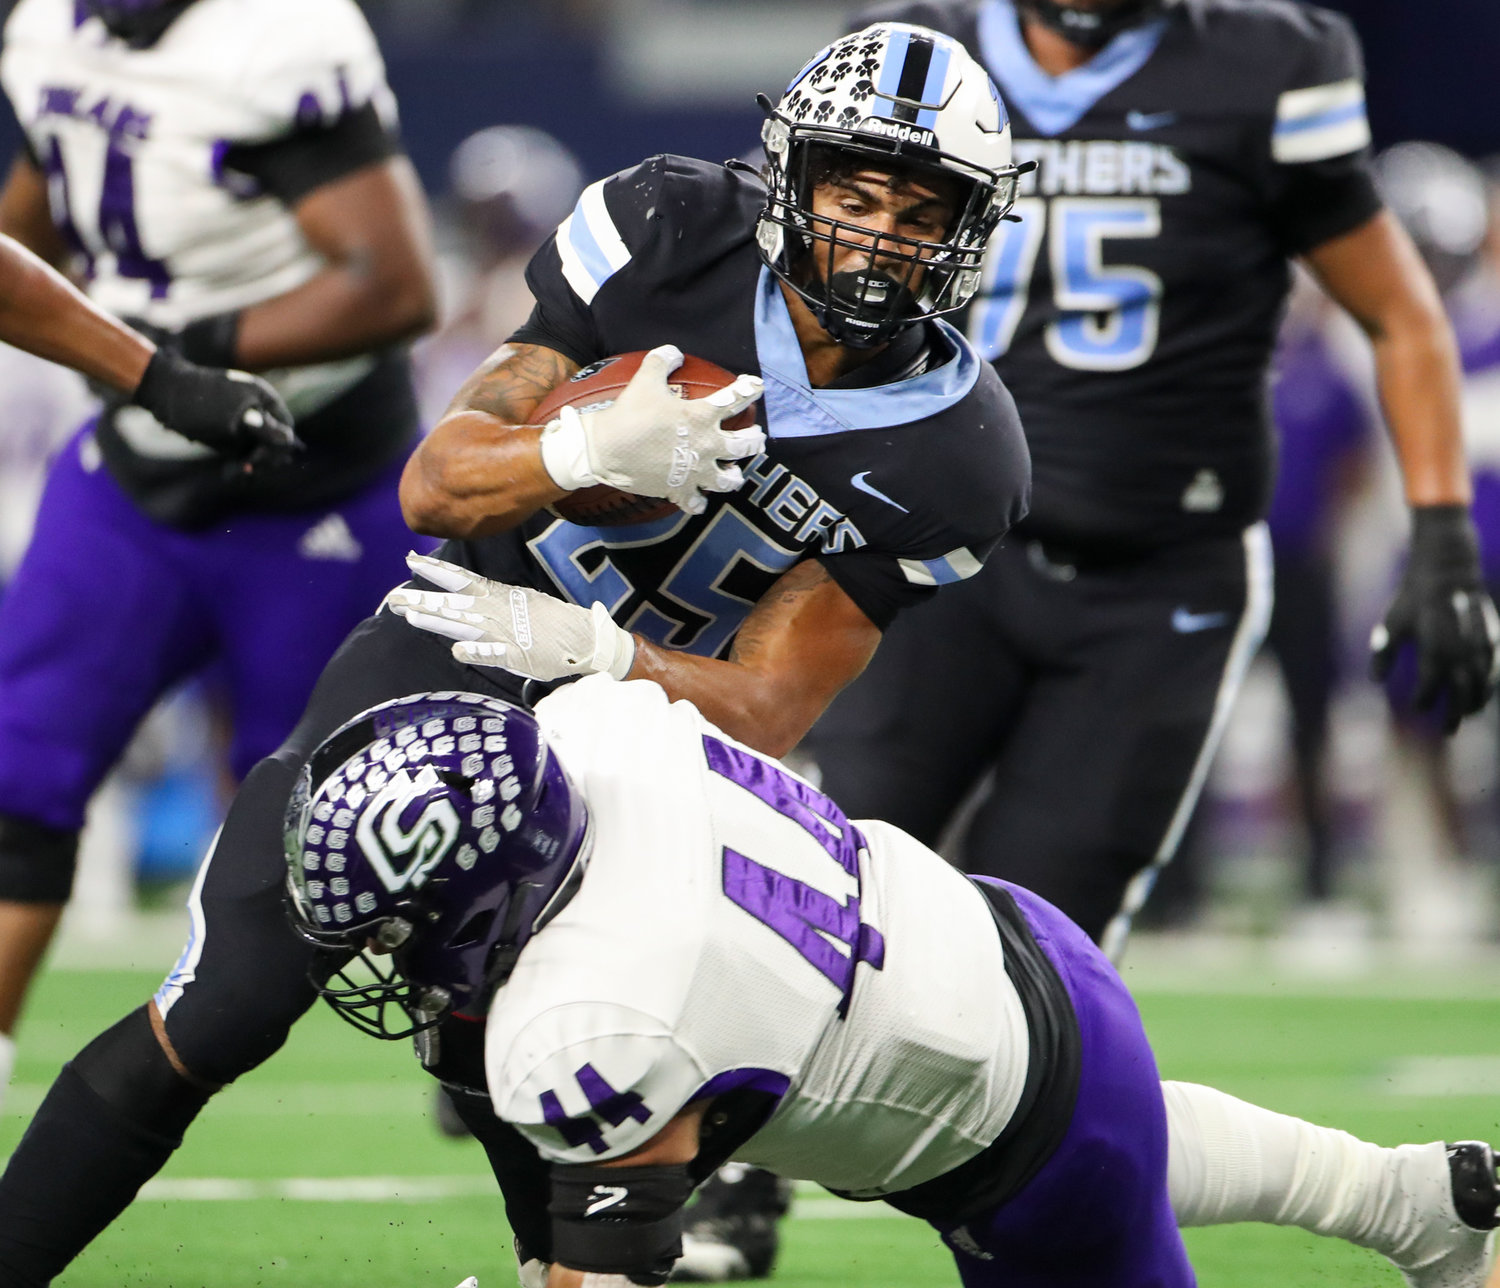 Paetow Panthers running back Jacob Brown (25) is tackled on a carry during the Class 5A-Division I state football championship game between Paetow and College Station on December 17, 2021 in Arlington, Texas.